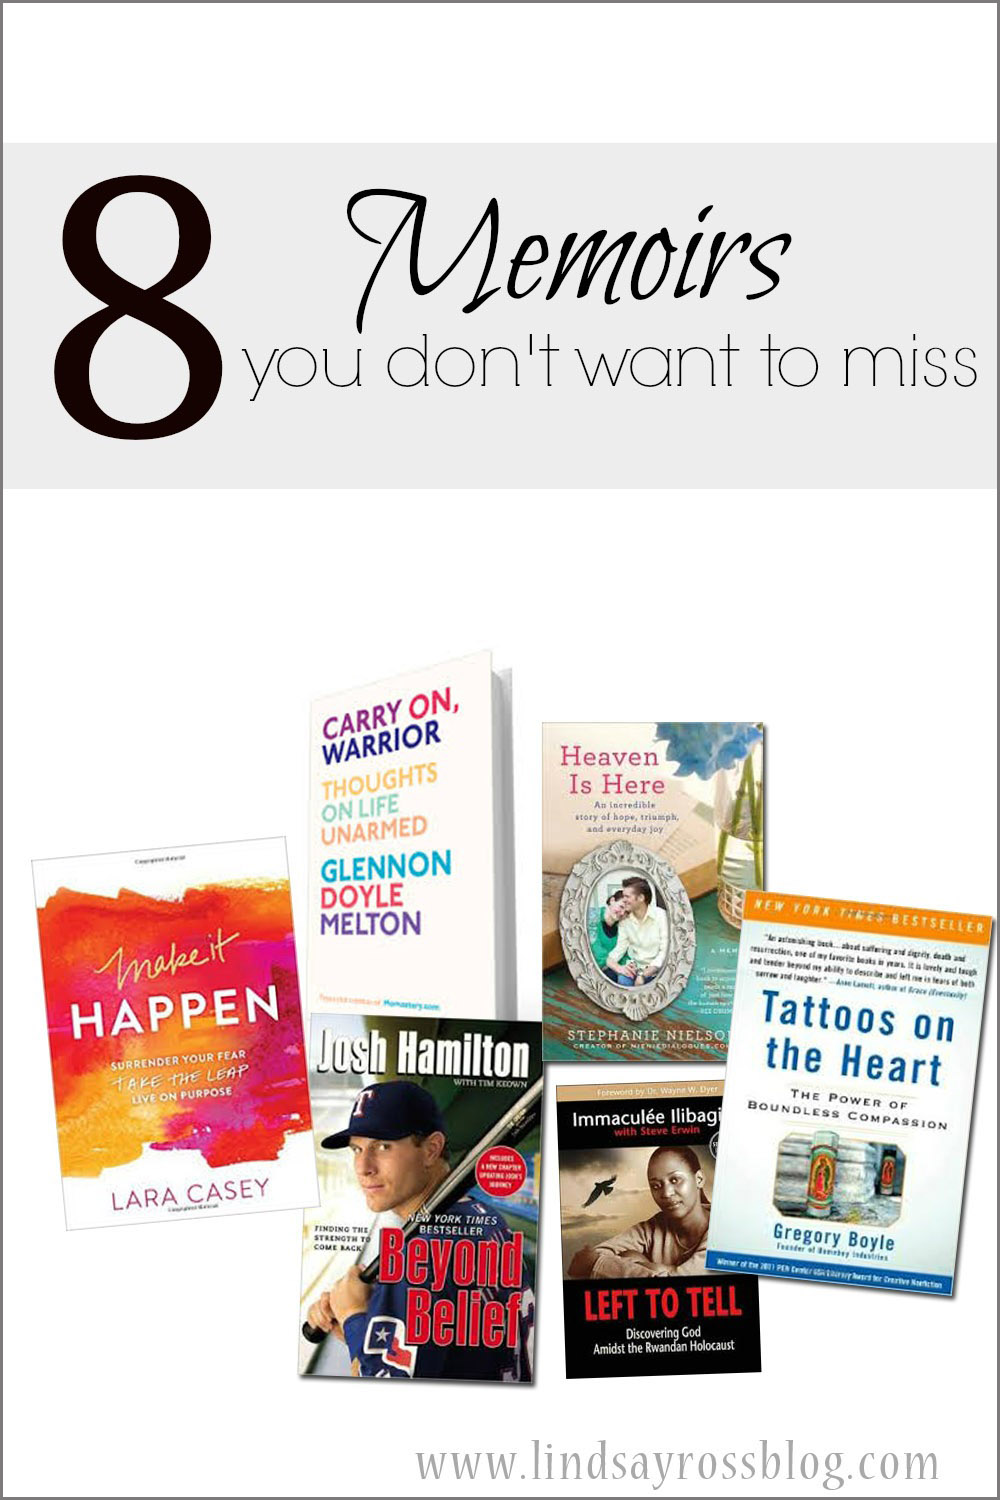 Memoirs you don’t want to miss